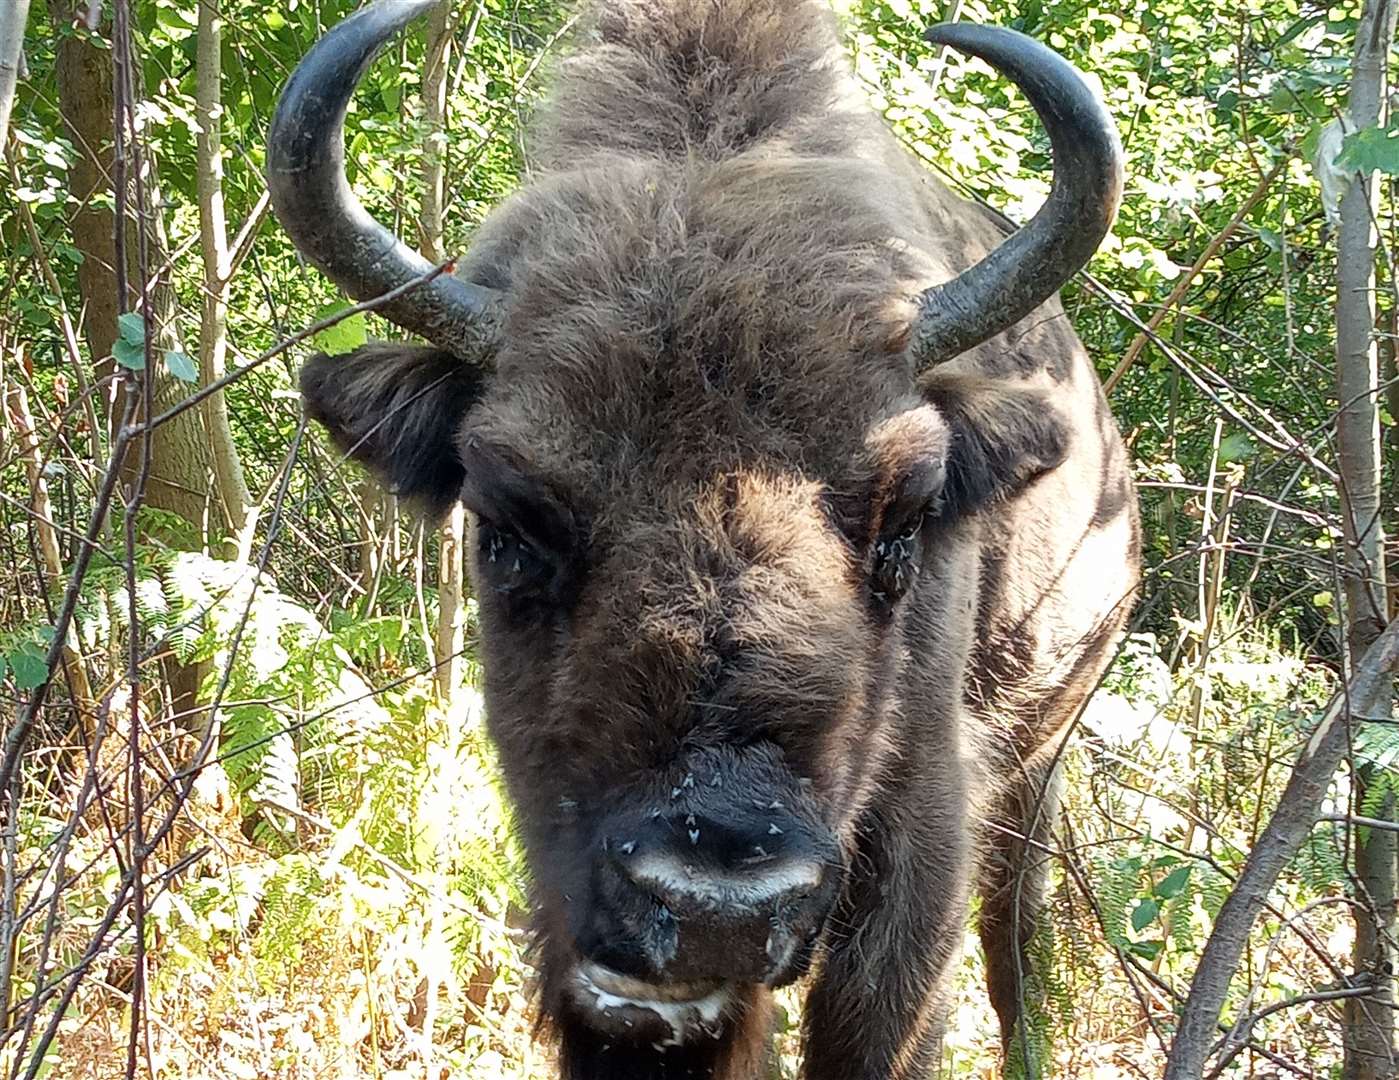 The bison have been in the woods for a month